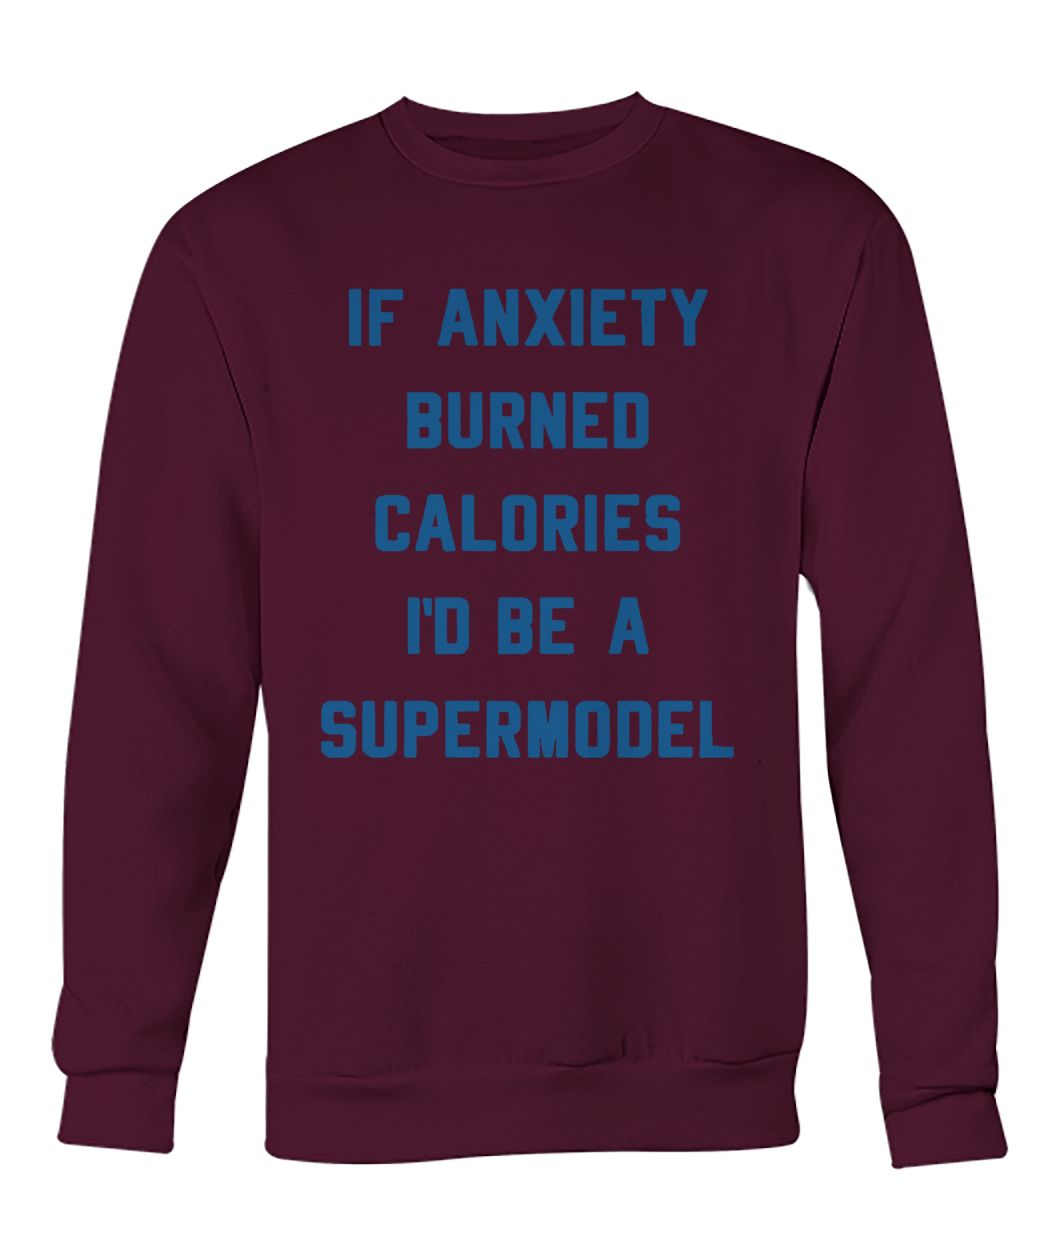 If anxiety burned calories I'd be a supermodel crew neck sweatshirt